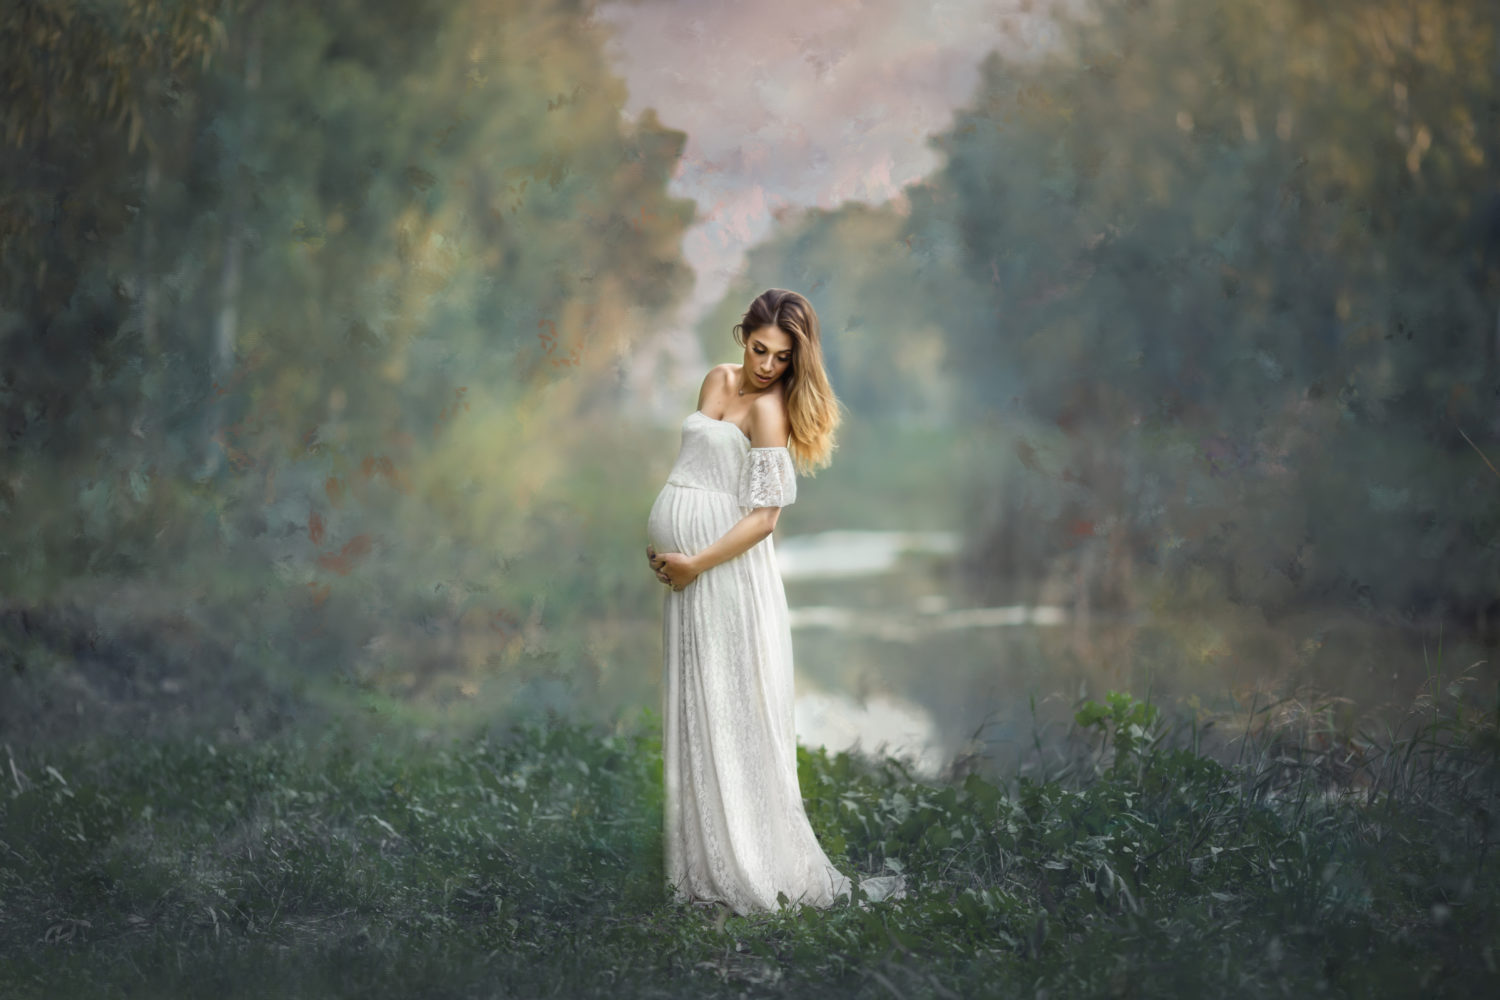 Top 5 Best Maternity Poses + Prompts for Natural Pregnancy Photos